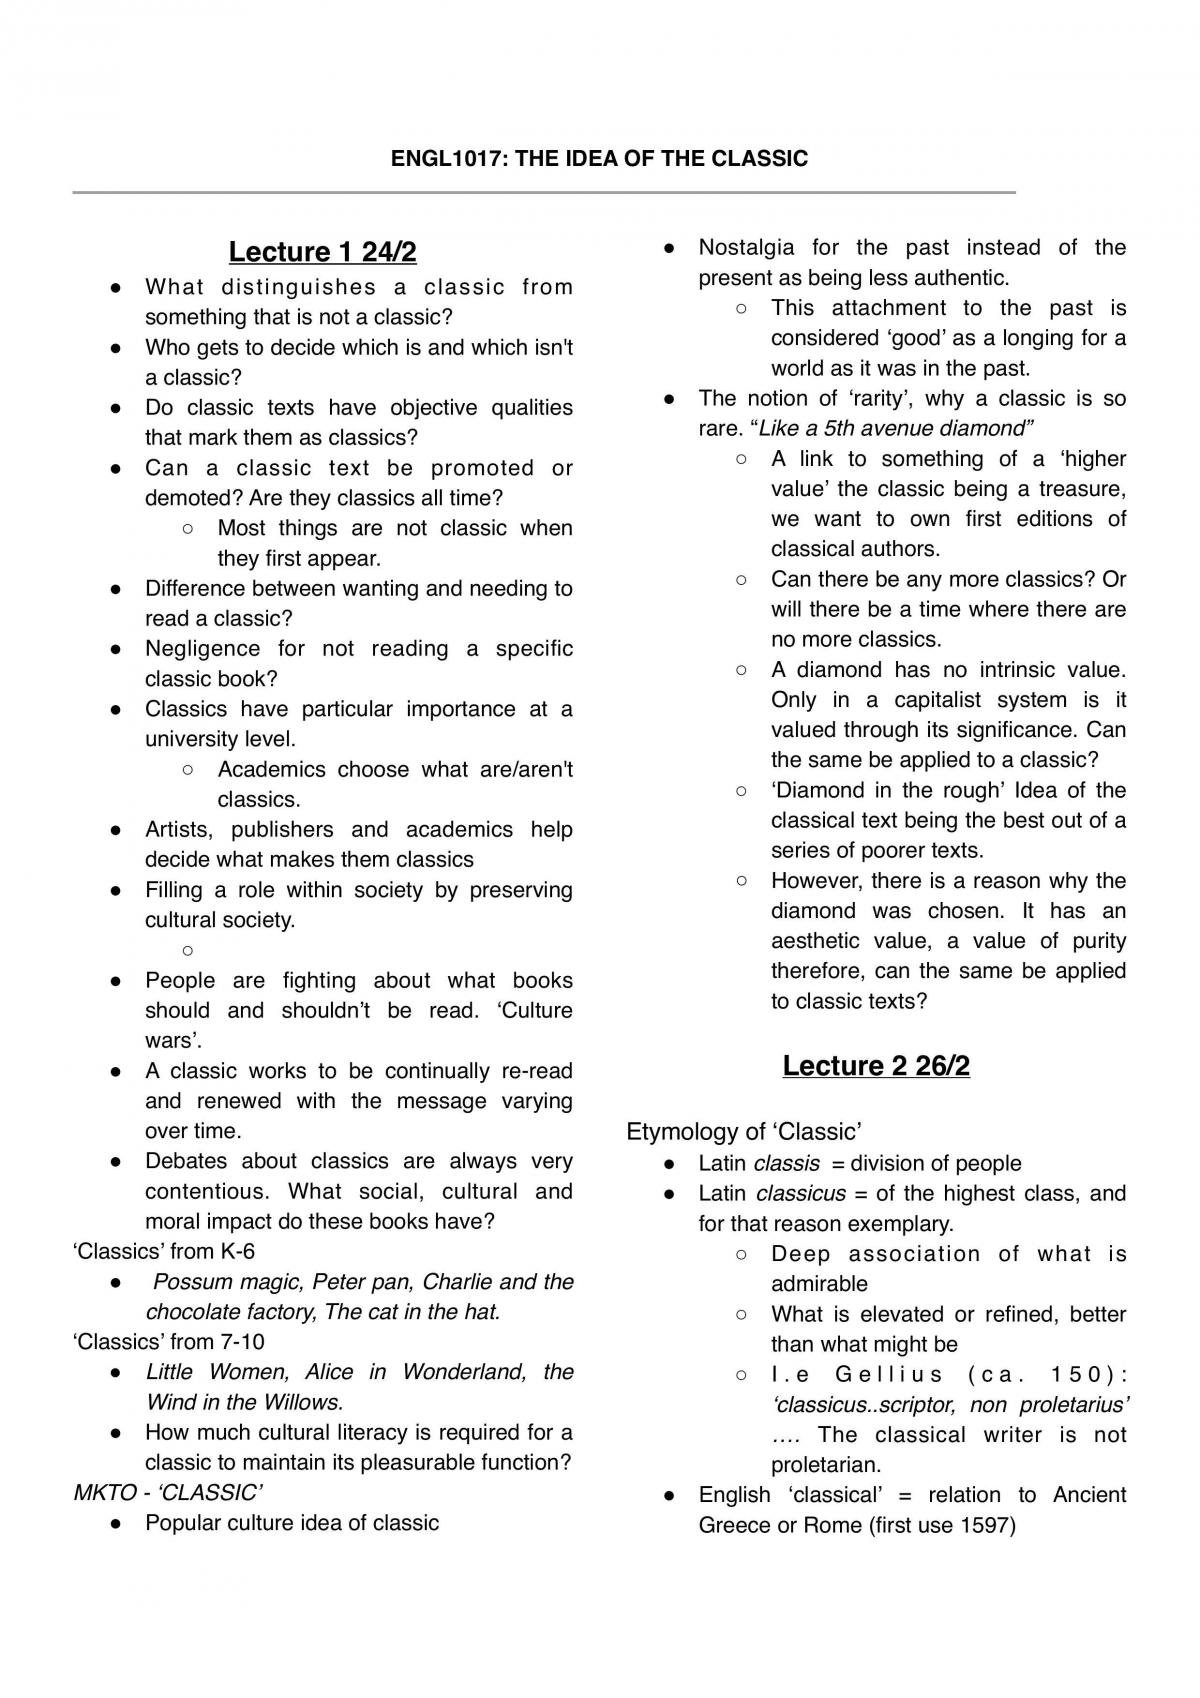 The Idea of the Classic Comprehensive ENGL1017 study notes - Page 1